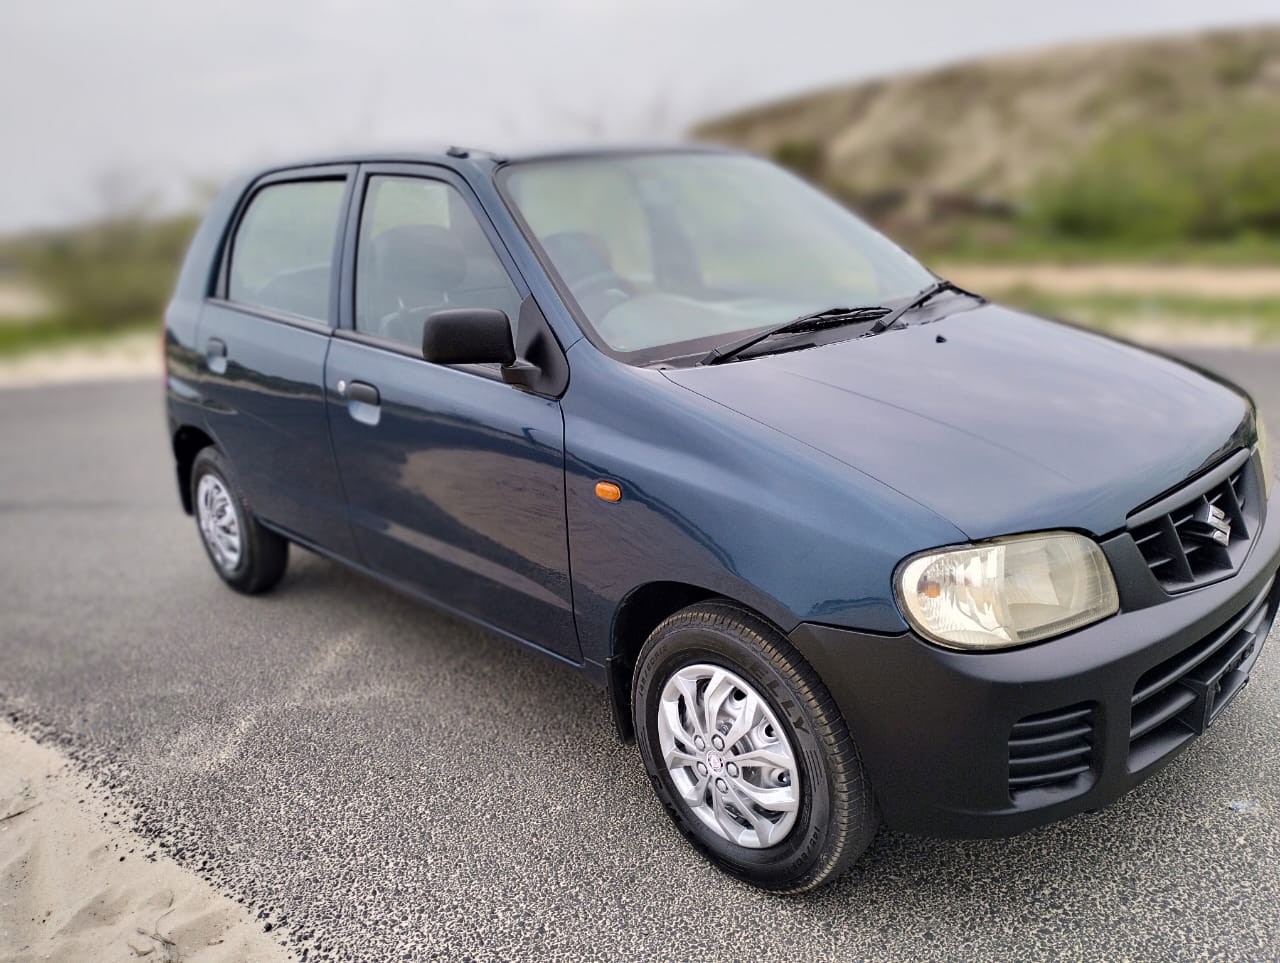 5194-for-sale-Maruthi-Suzuki-Alto-Petrol-Second-Owner-2009-PY-registered-rs-158000